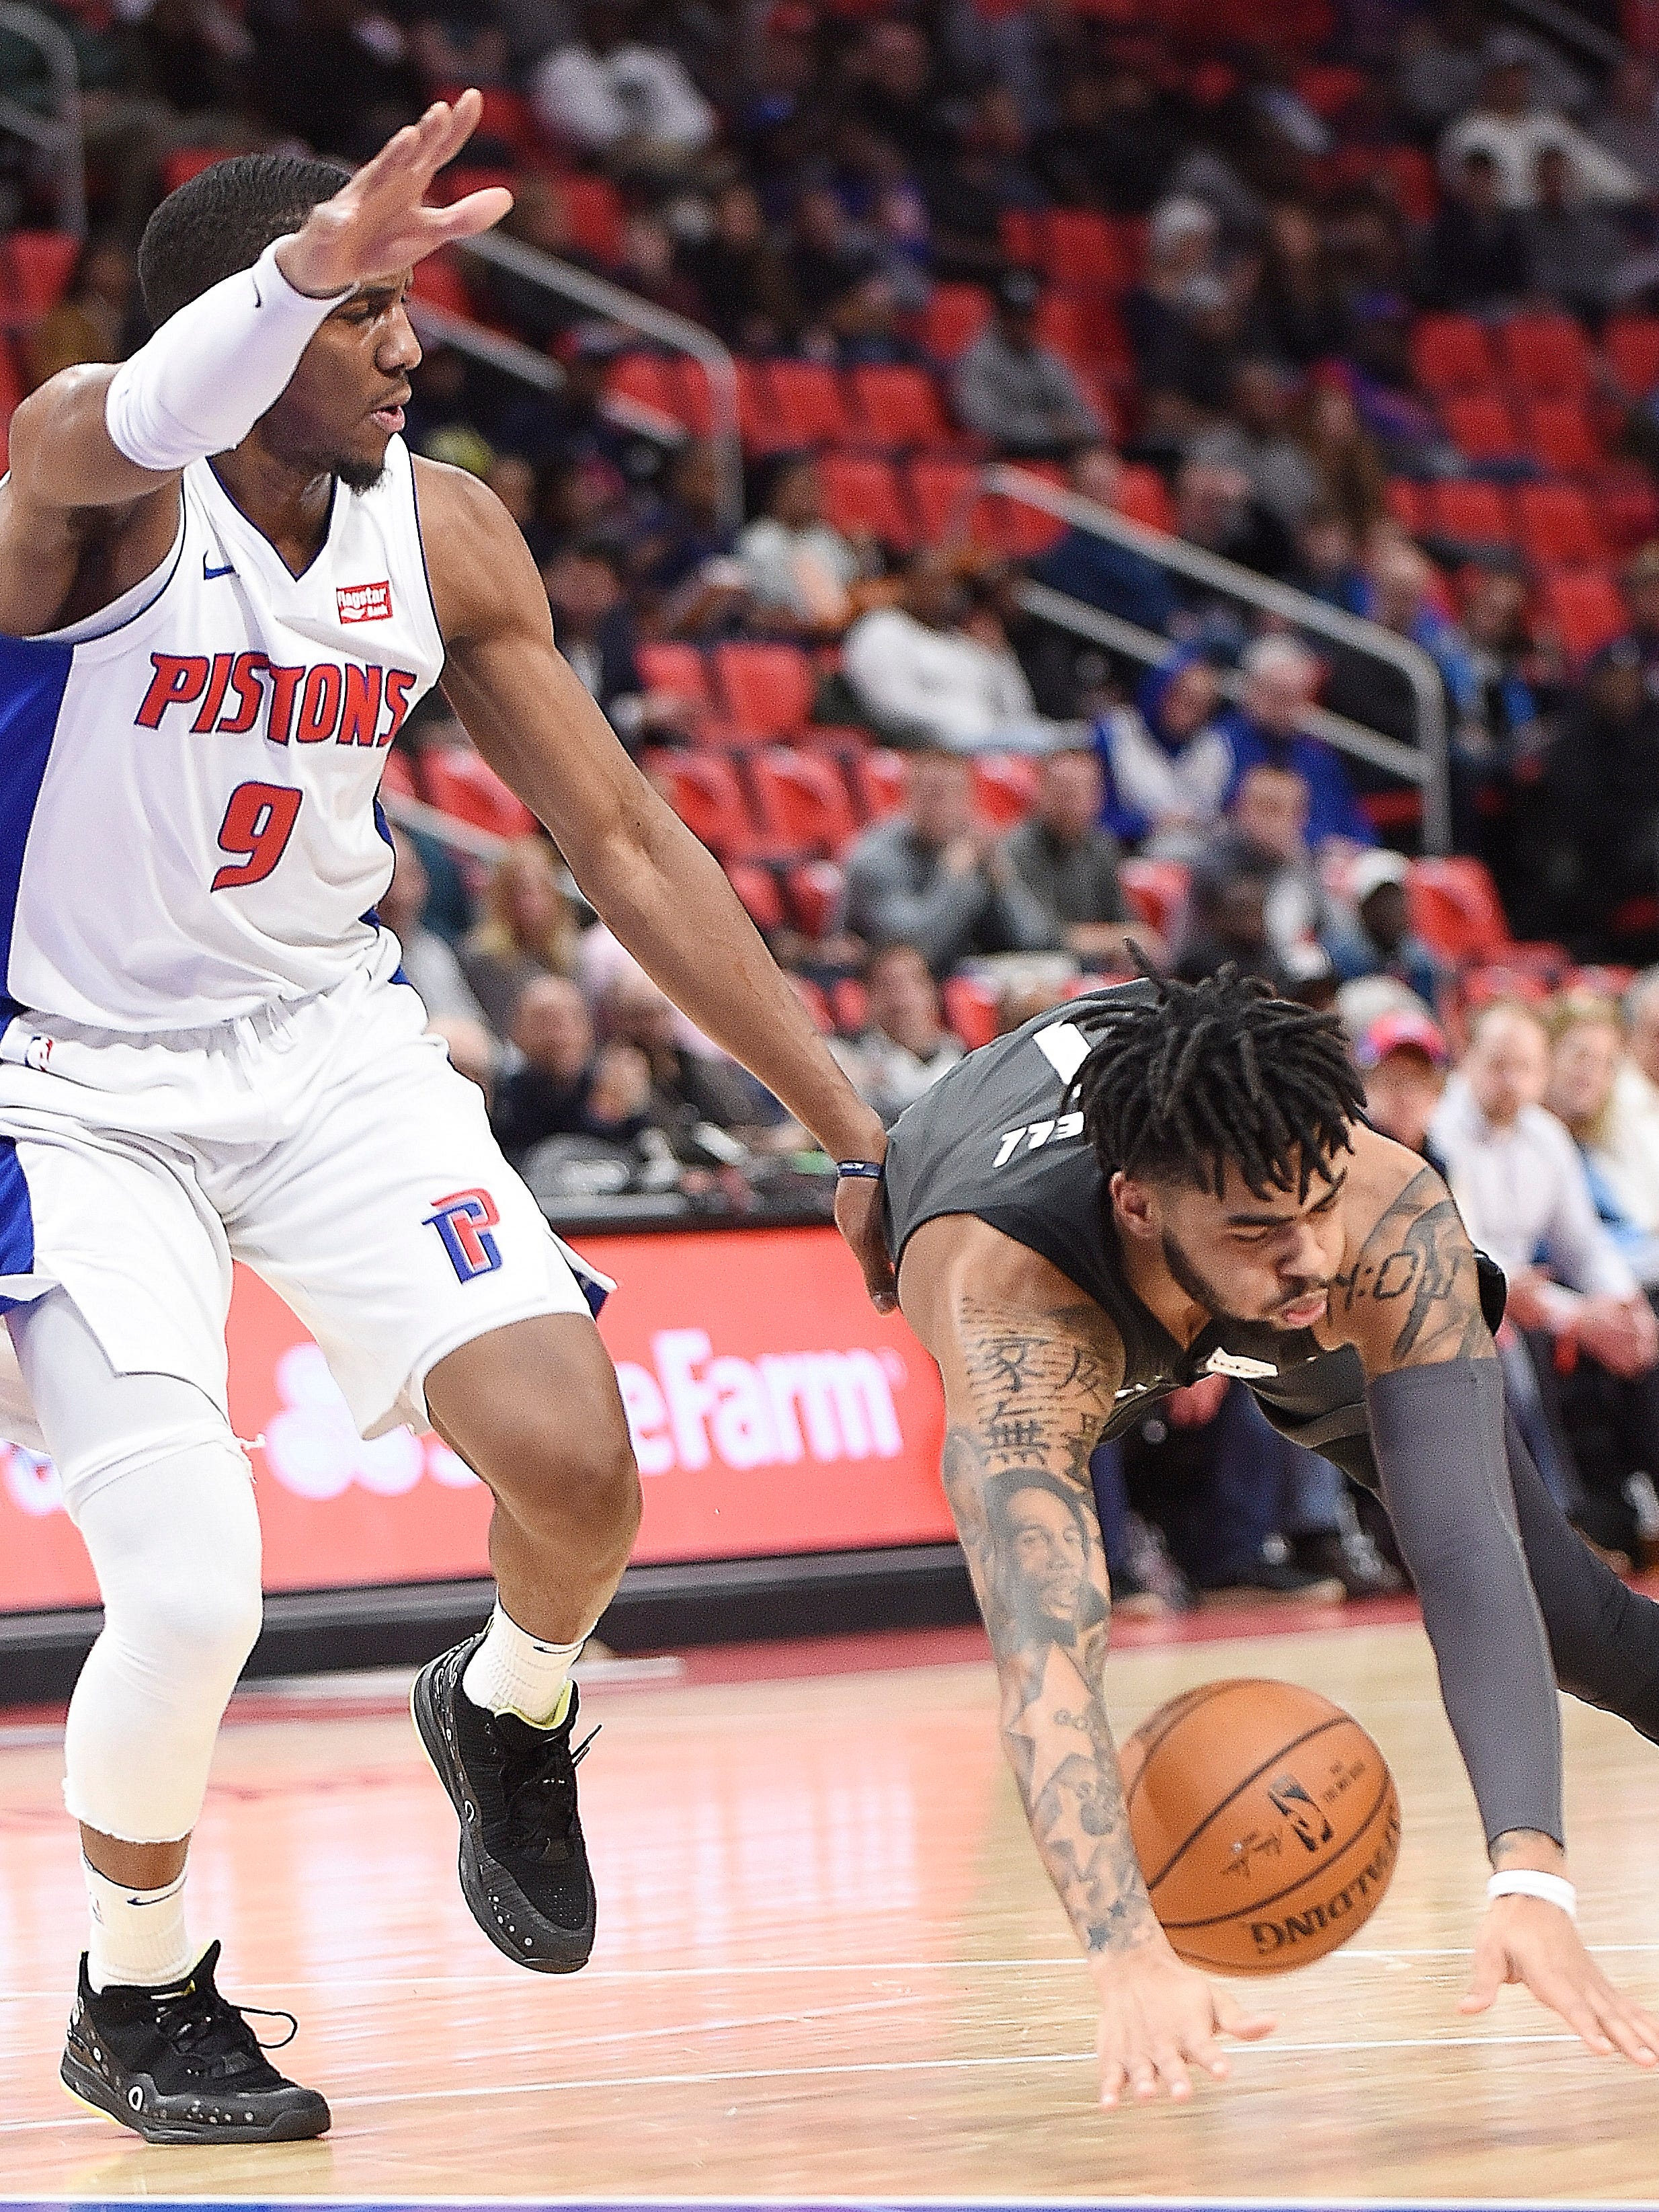 Pistons' Langston Galloway fouls Nets' D' Angelo Russell in the second quarter.